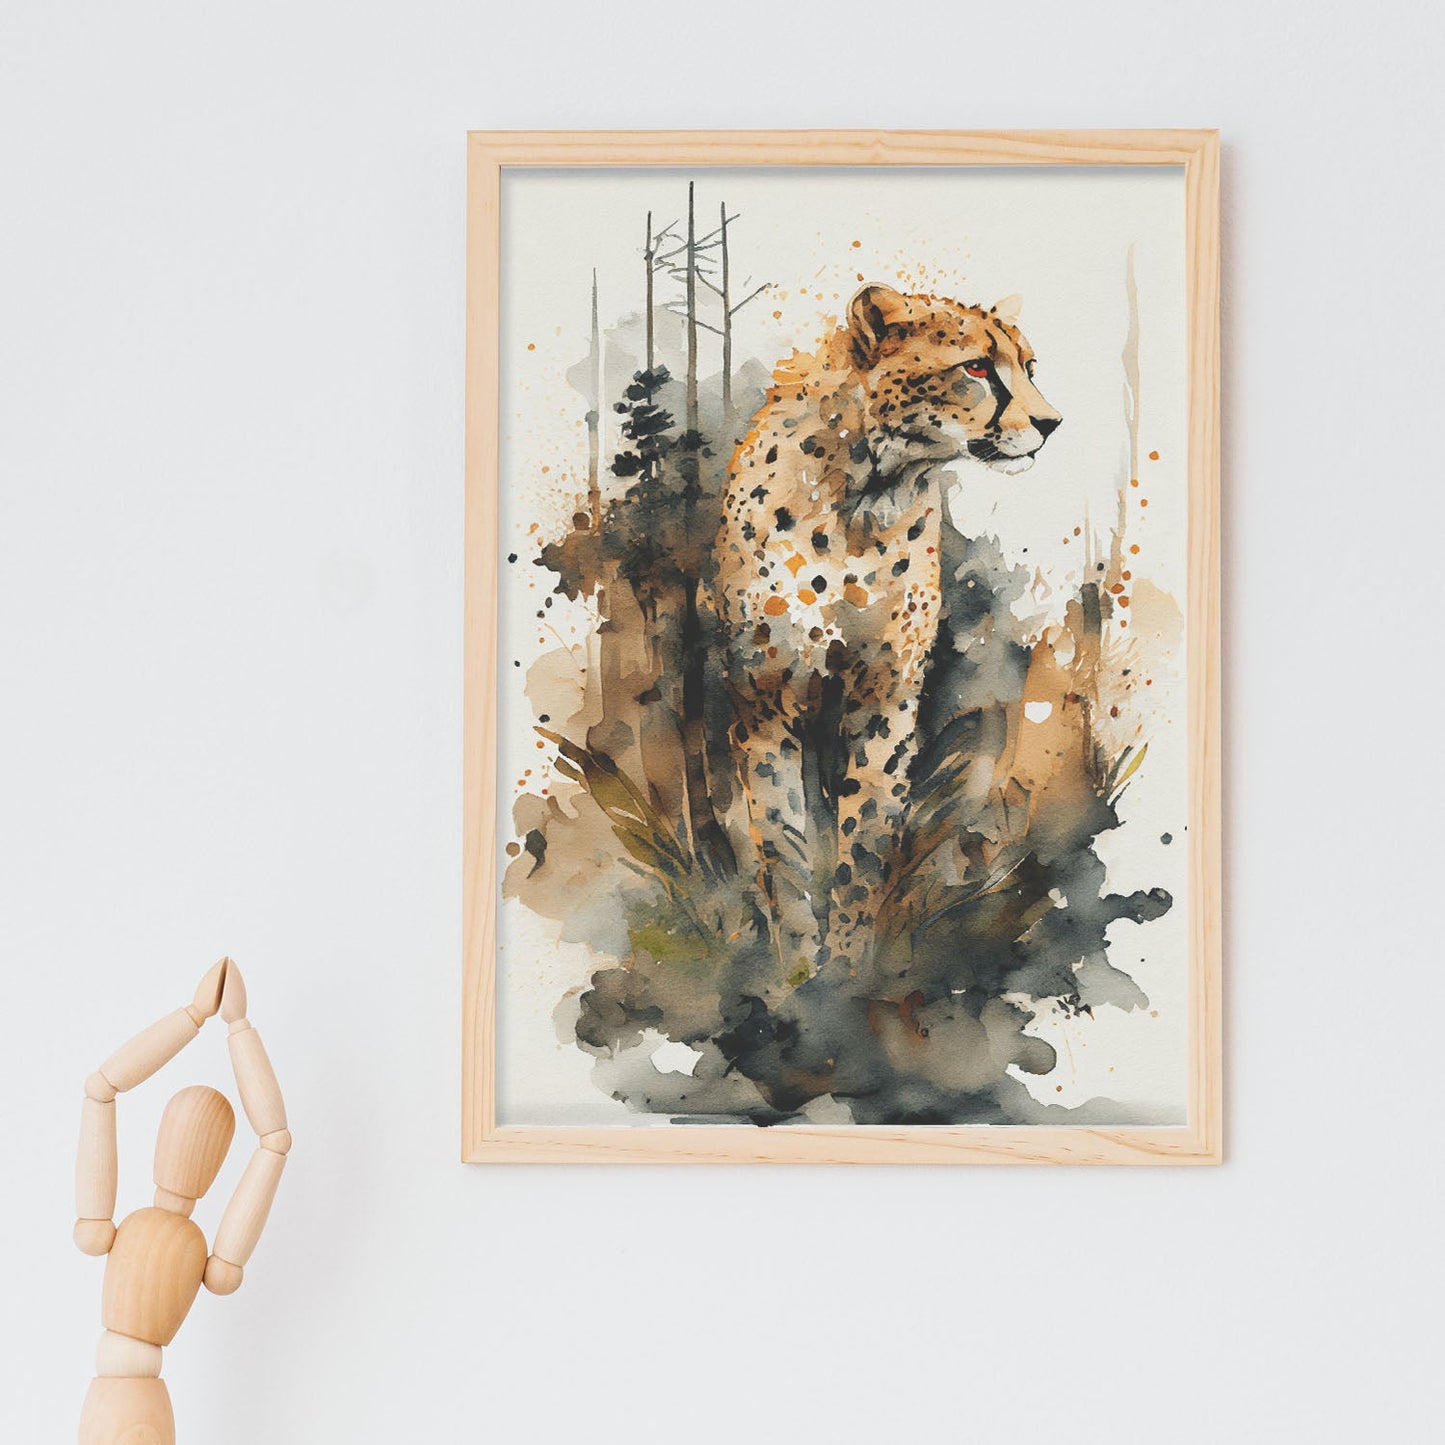 Nacnic Watercolor of Cheetah in the forest_2. Aesthetic Wall Art Prints for Bedroom or Living Room Design.